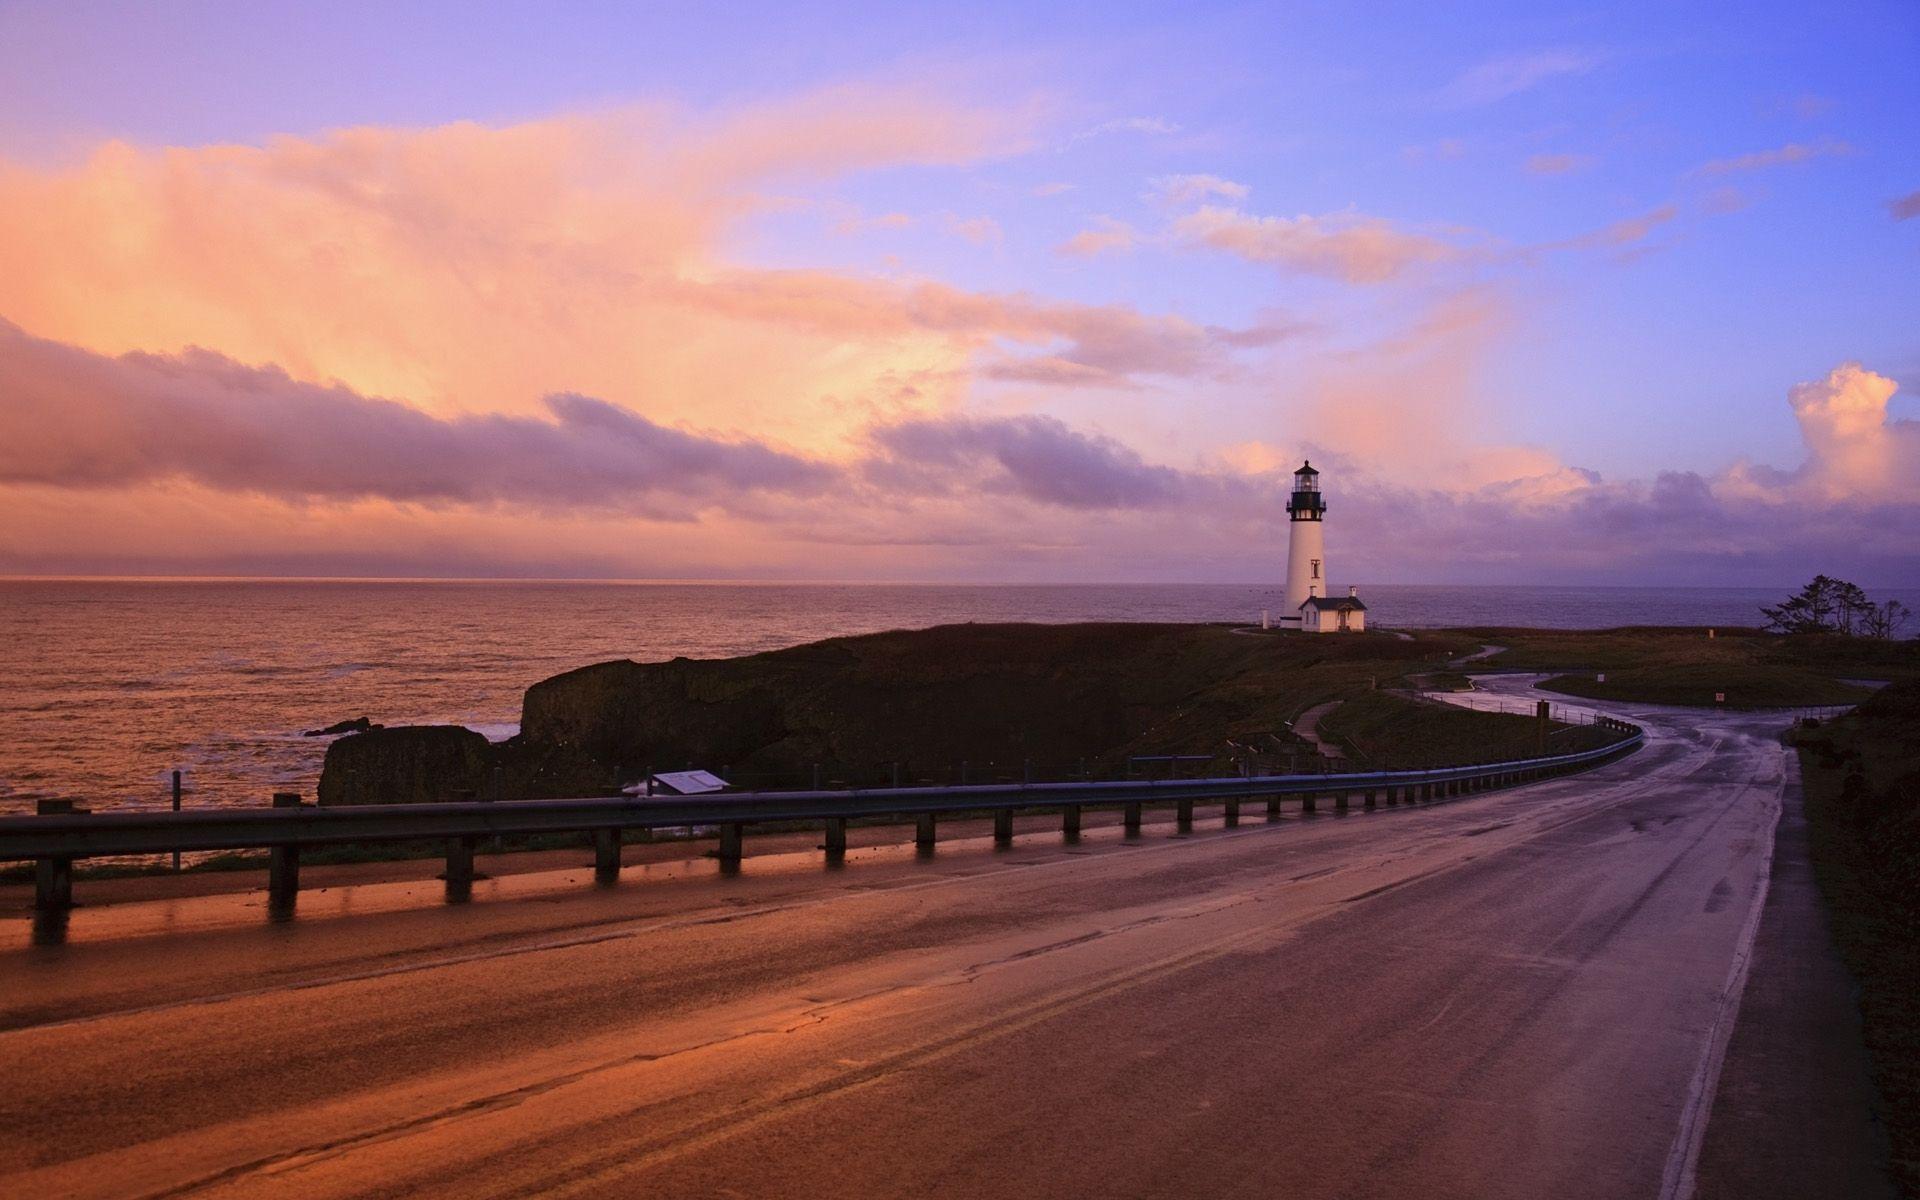 Sample Picture image A road and lighthouse along the Oregon Coast